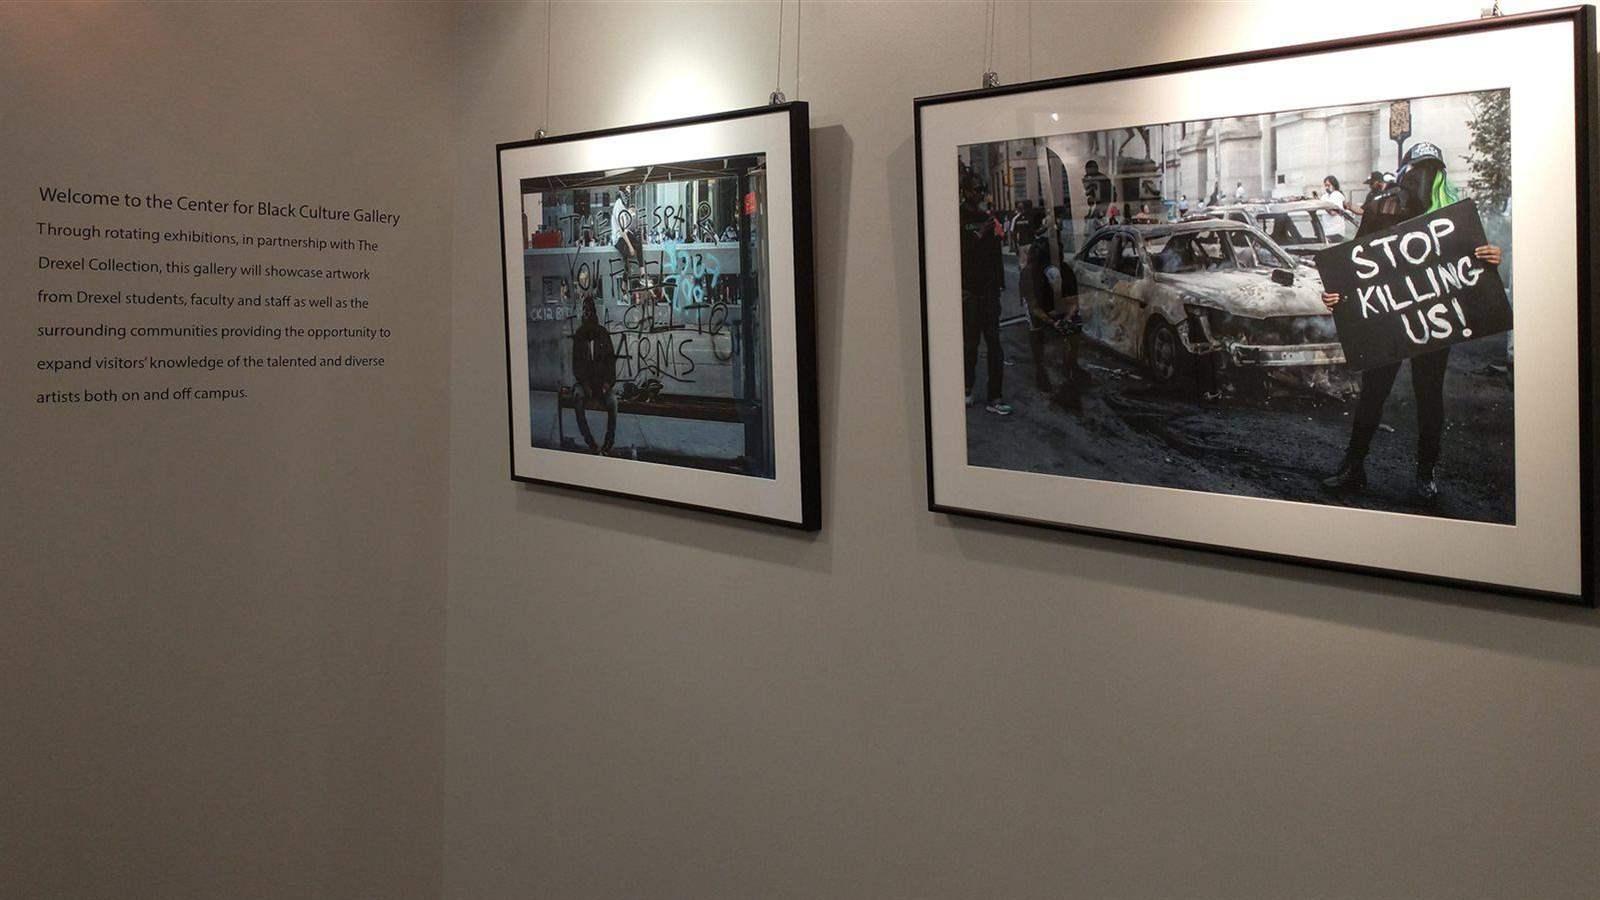 Featured photographs in the CBC’s rotating gallery space